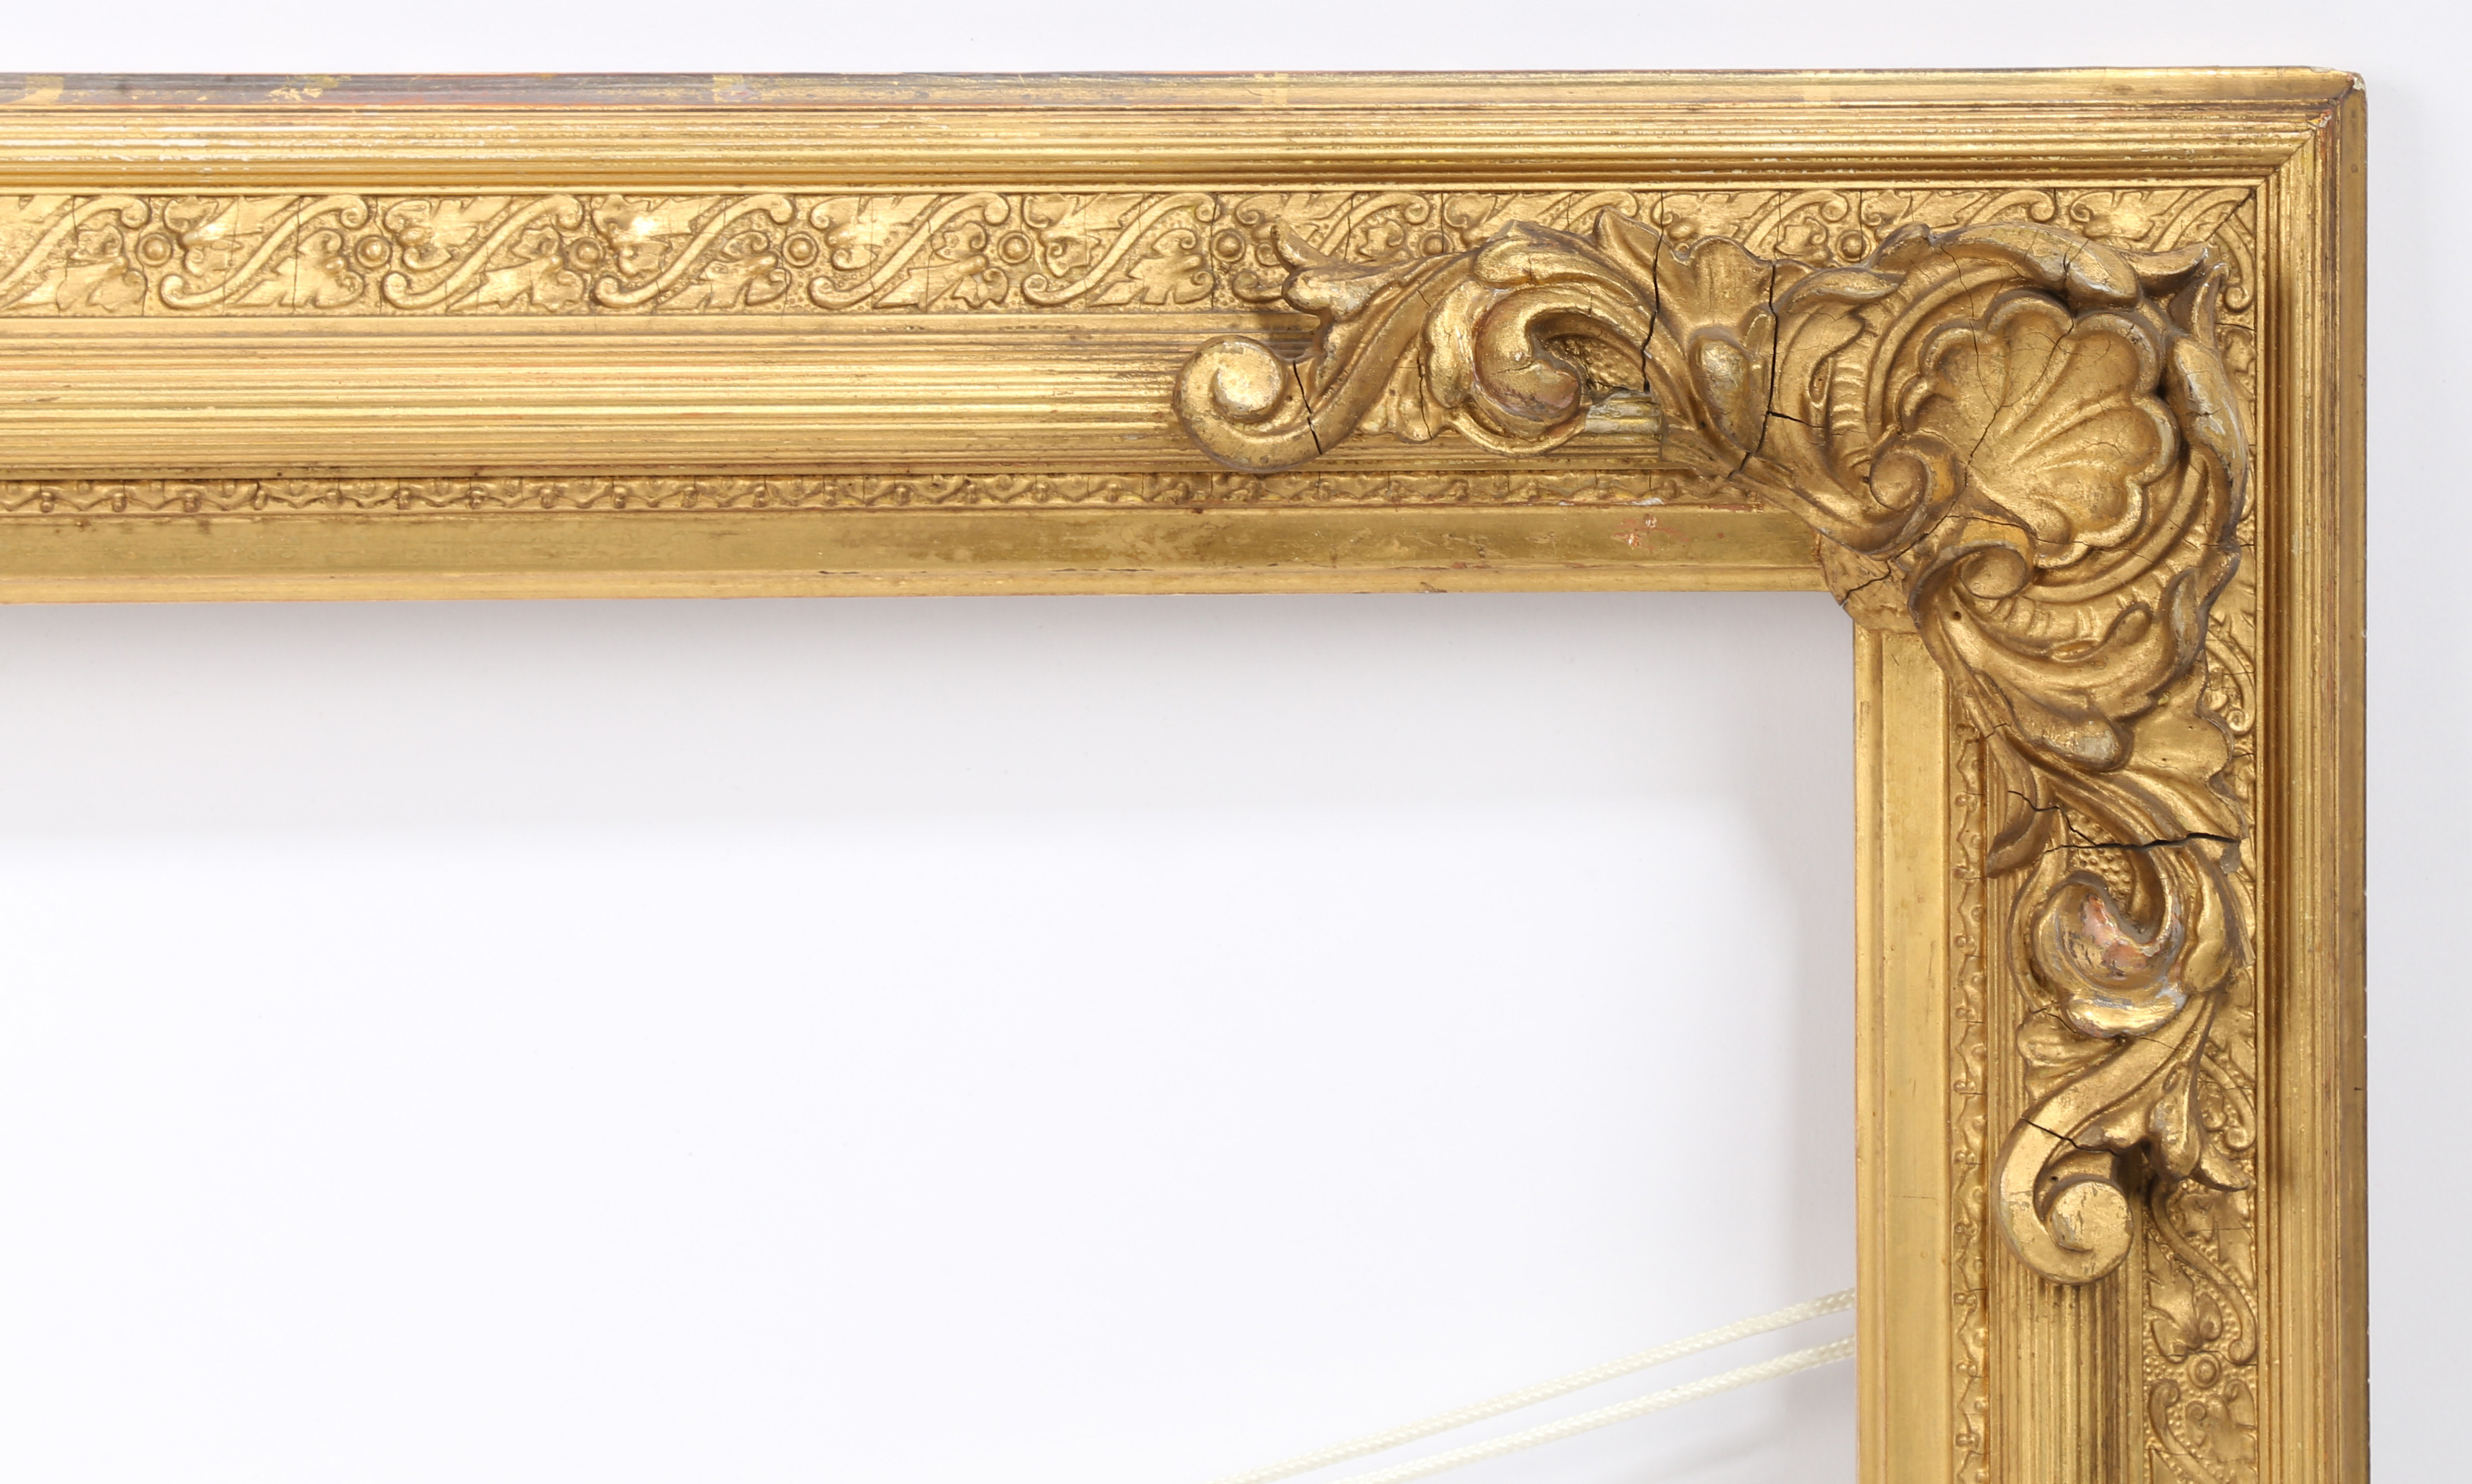 19th century English watercolour frame with corners - rebate size 29in x 17in